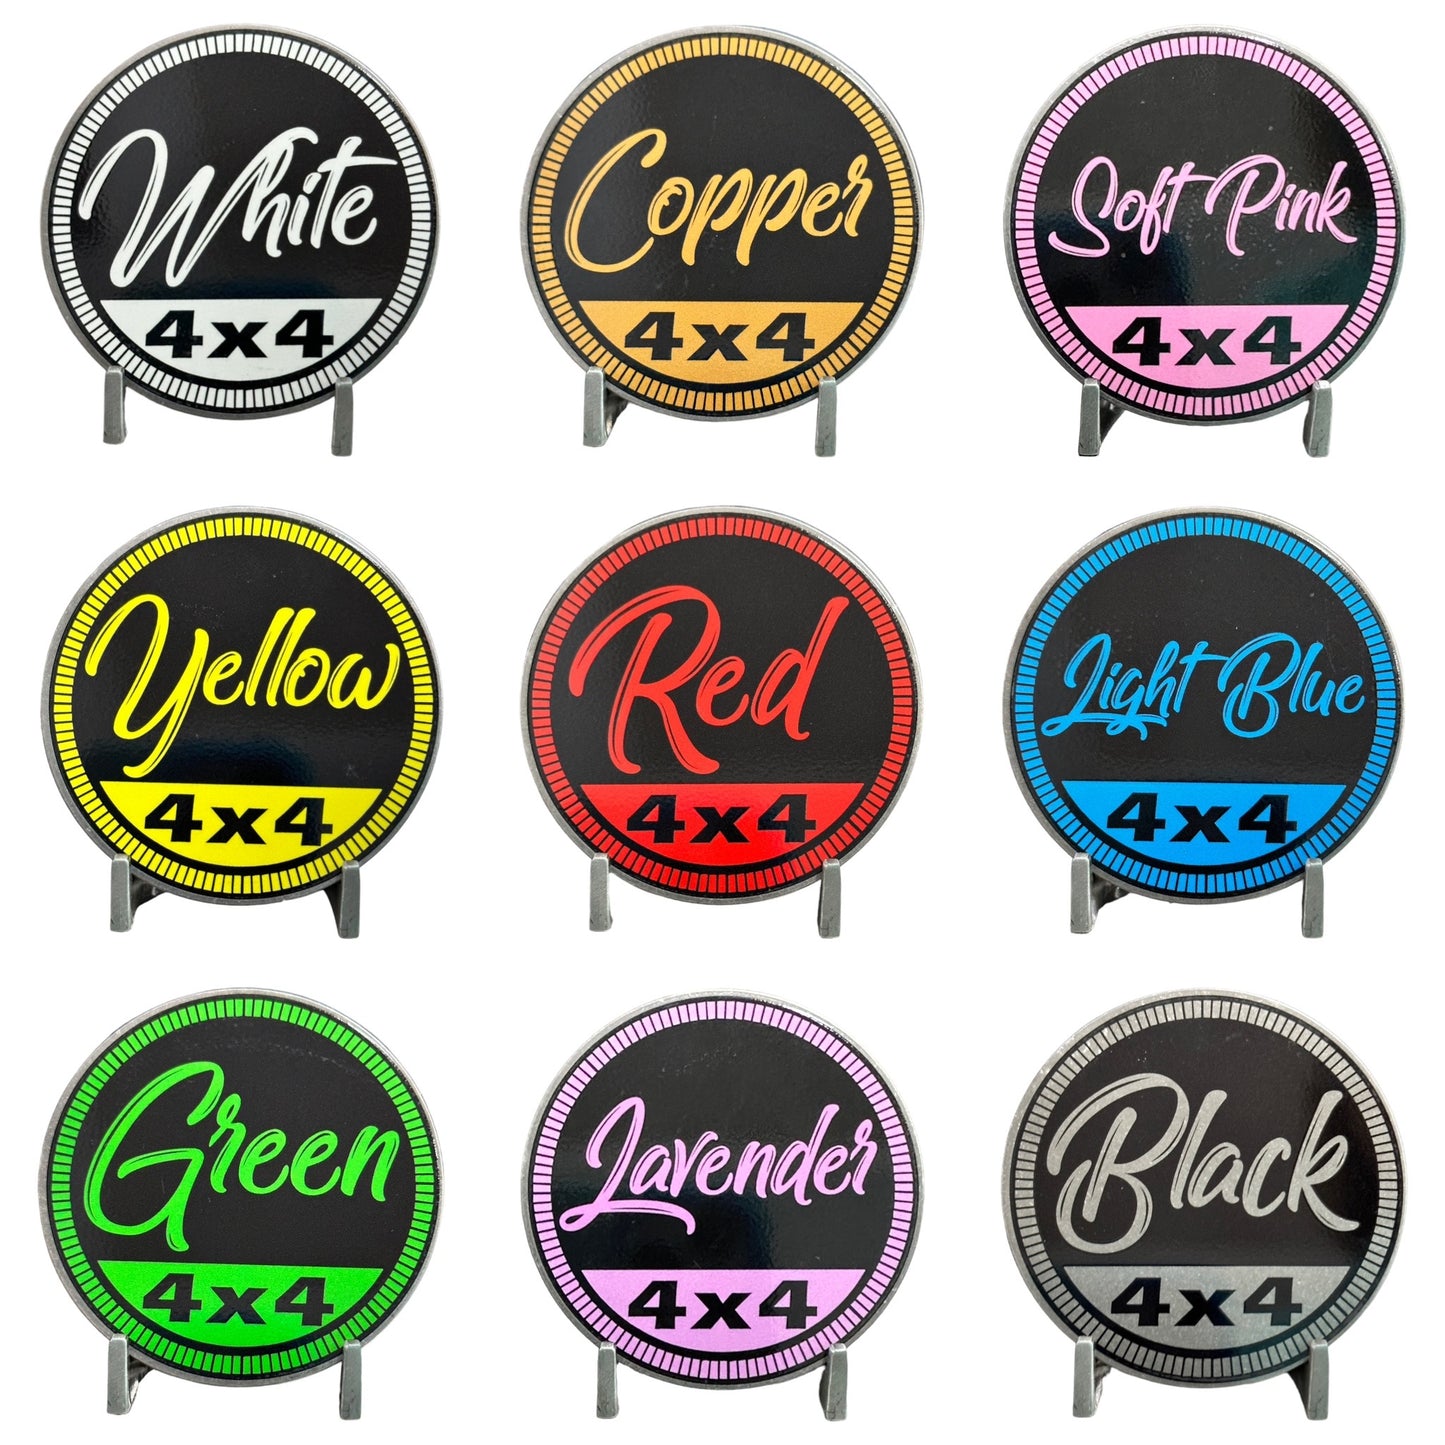 Lakeland Jeep Club (Multiple Colors Available)